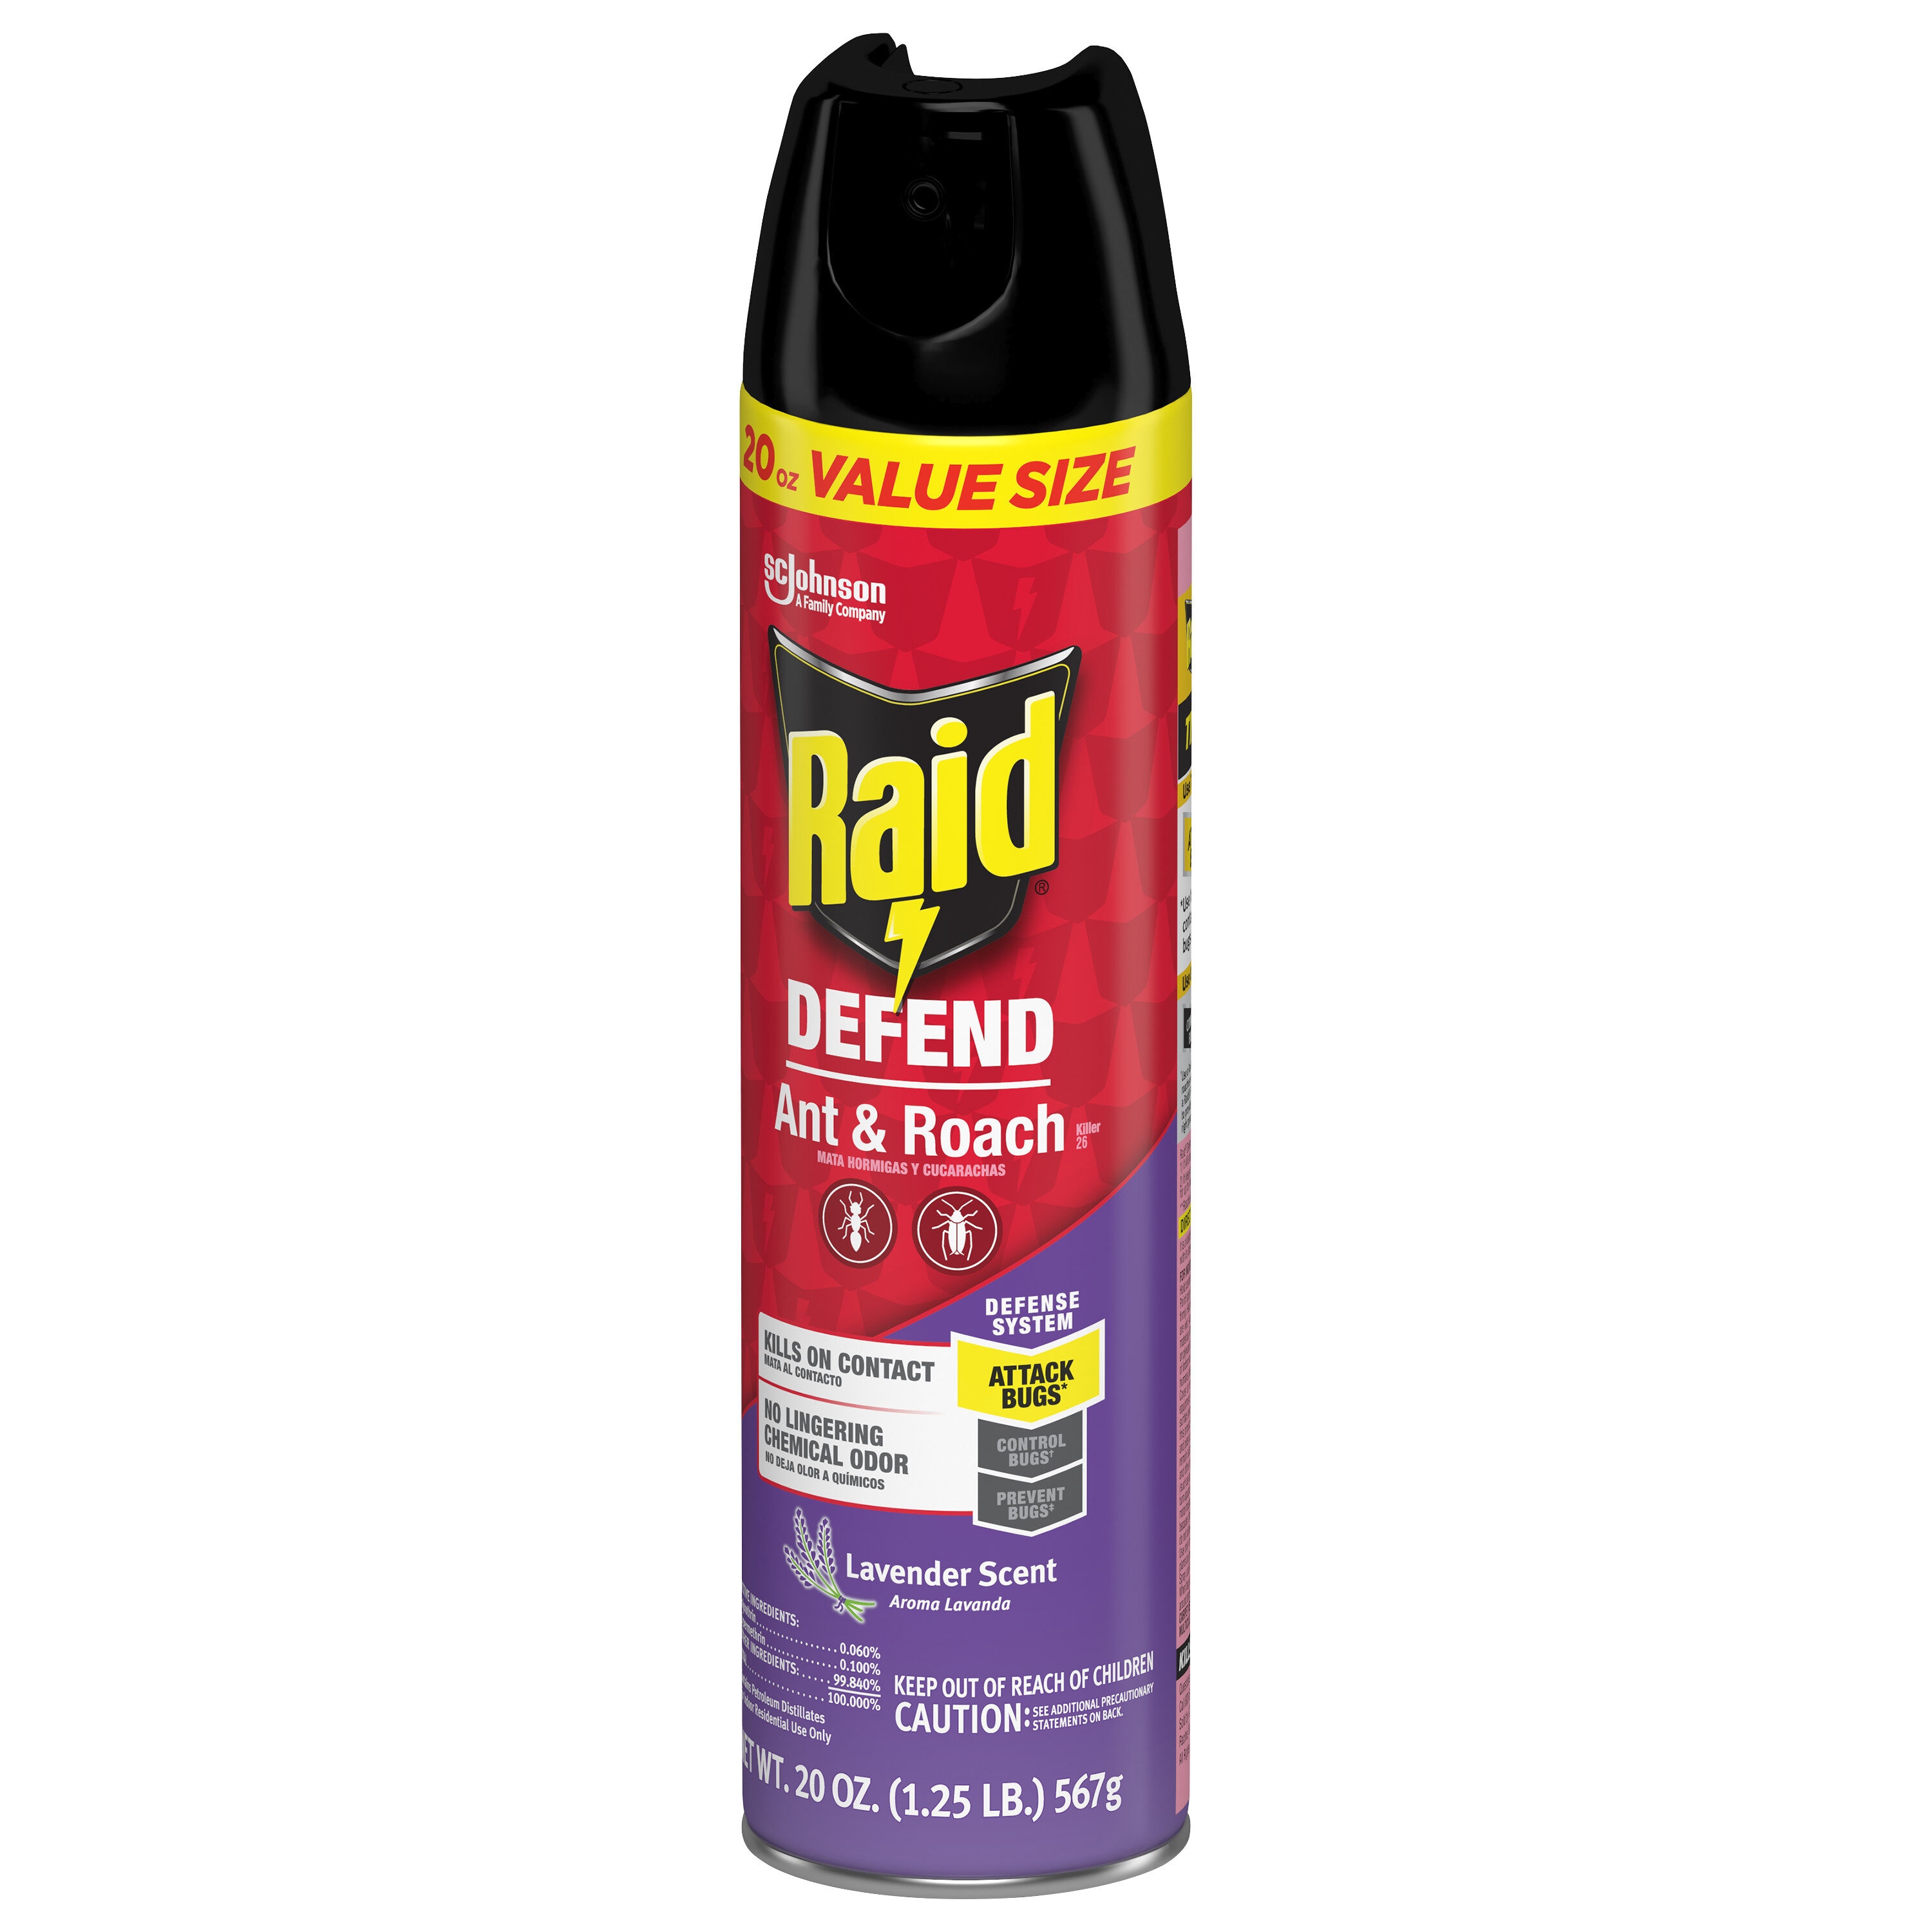 Wondercide - Ant & Roach Aerosol Spray for Kitchen, Home, and Indoor Areas - Ant, Roach, Spider, Flea, Stink Bug Killer with Nat